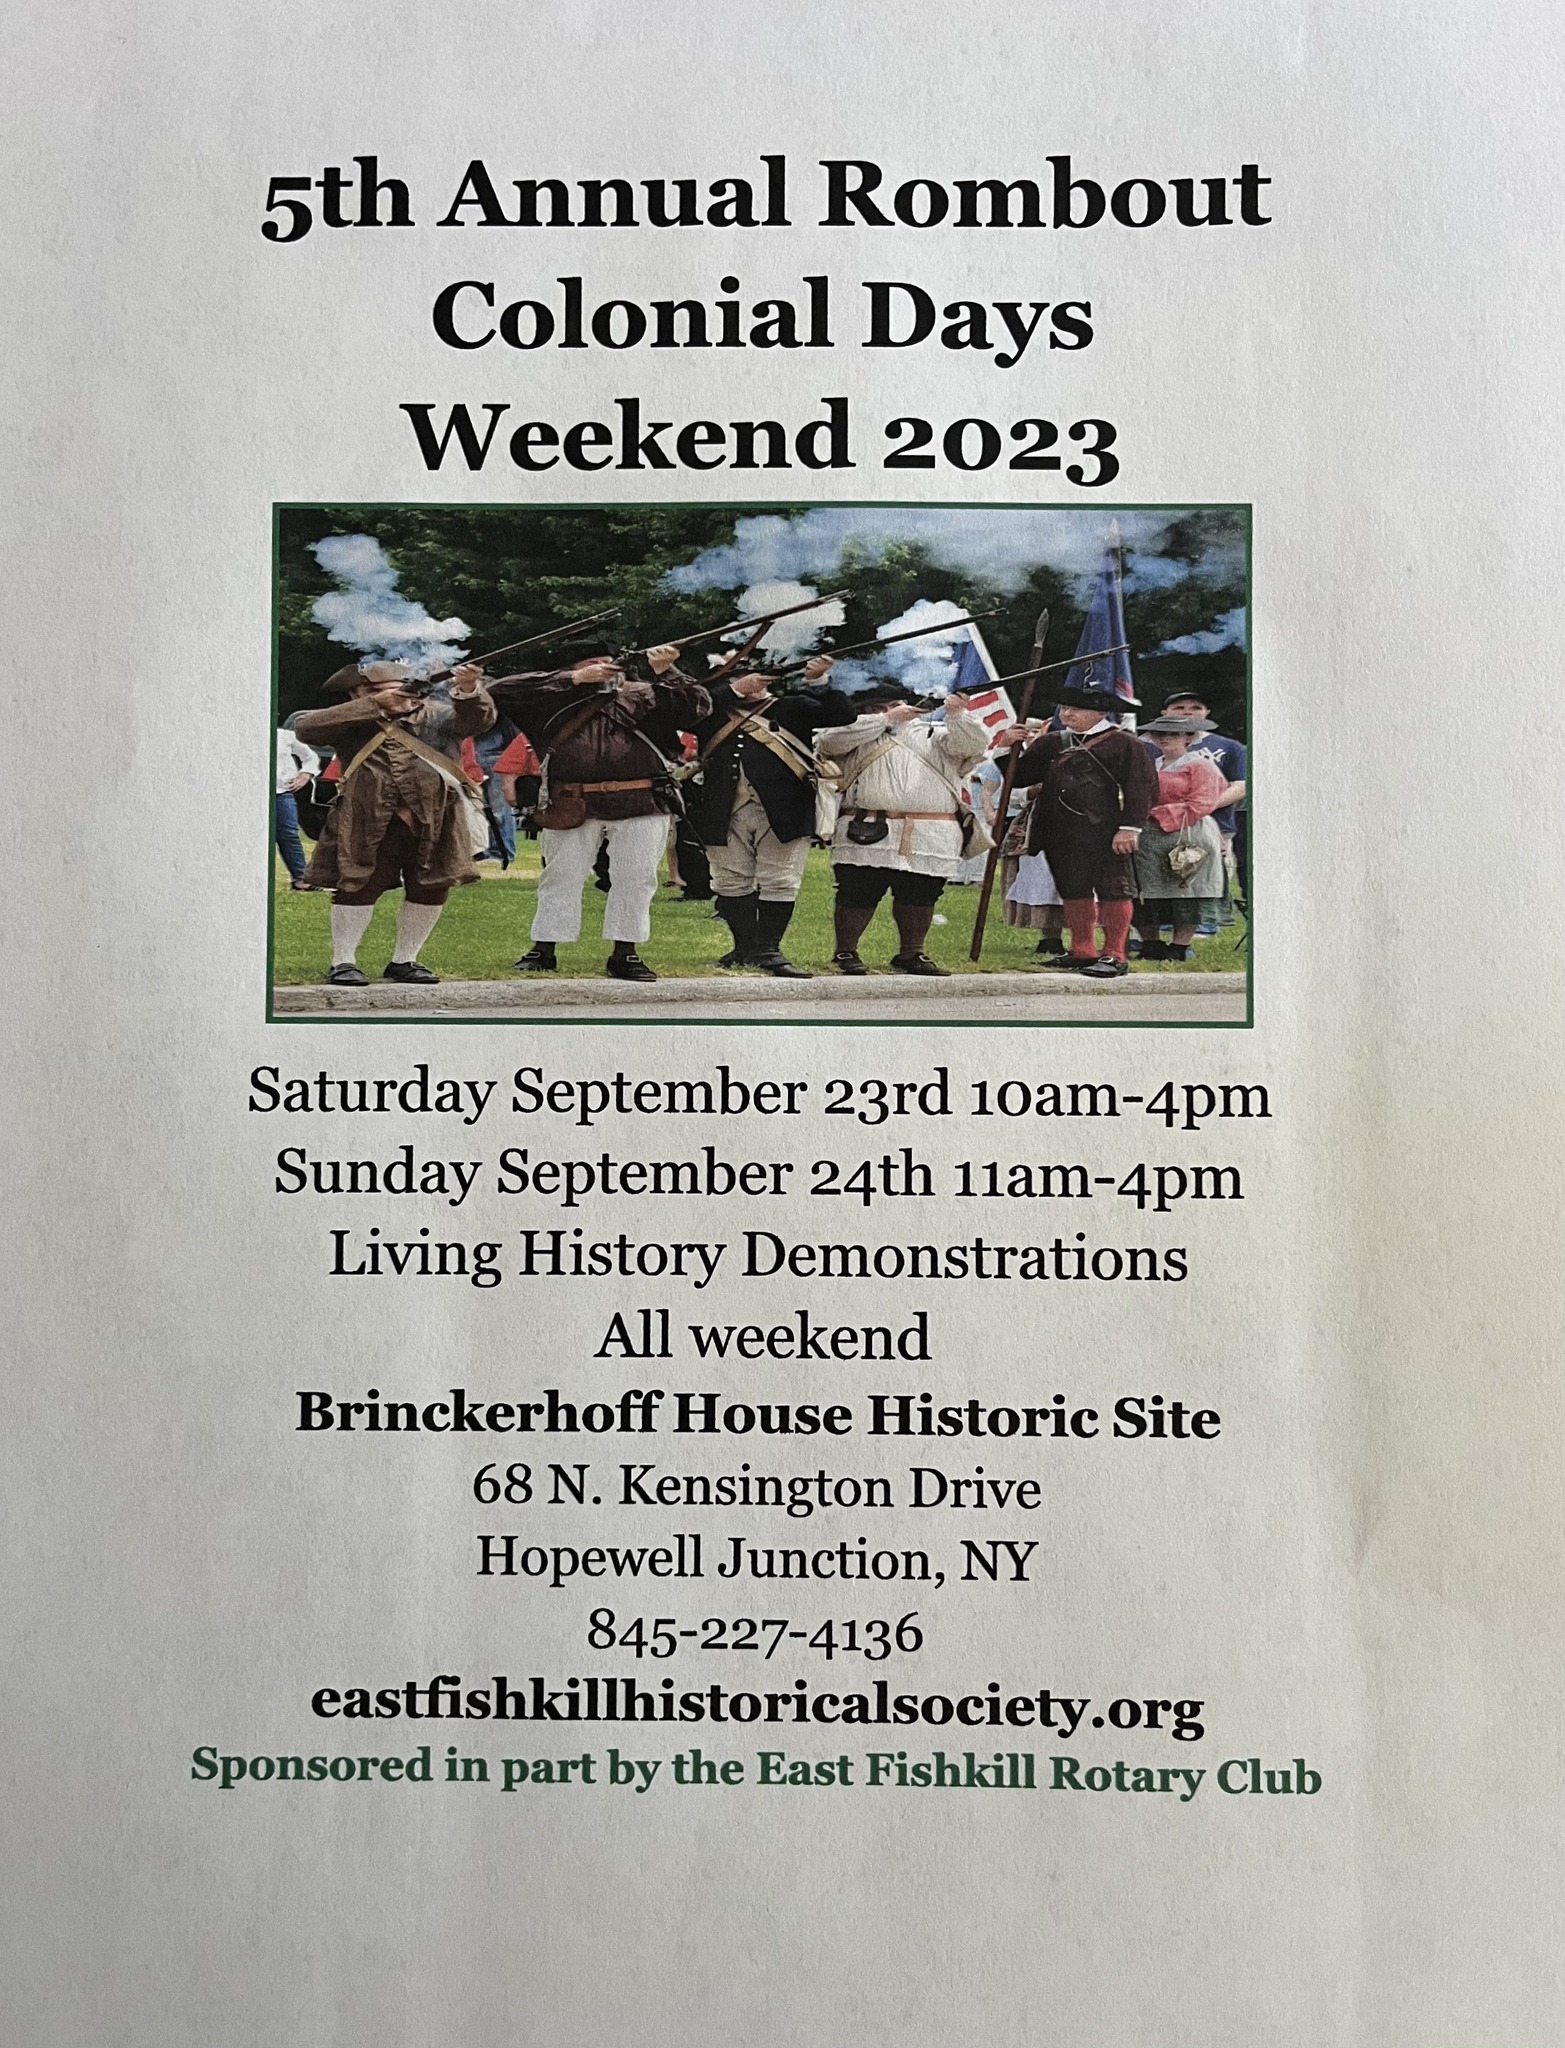 5th Annual Rombout Colonial Days